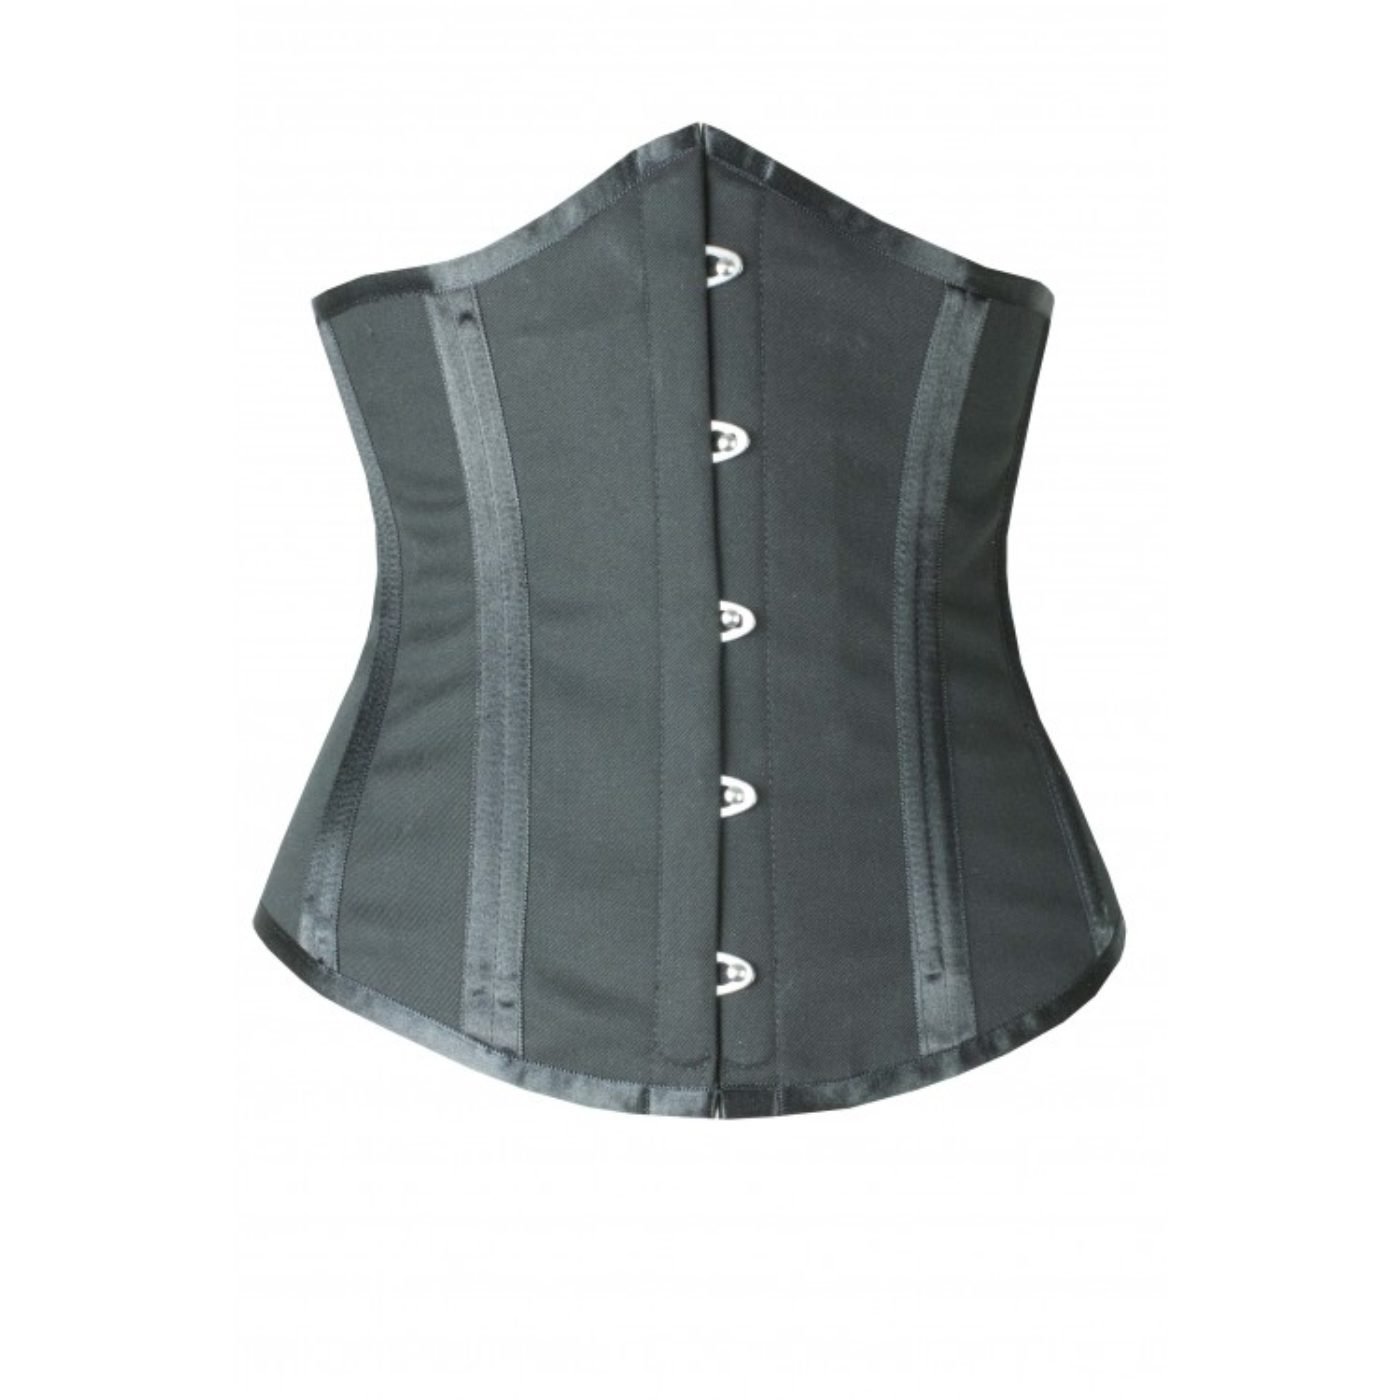 Majestic Waist Training corset in Black Satin | By Vollers